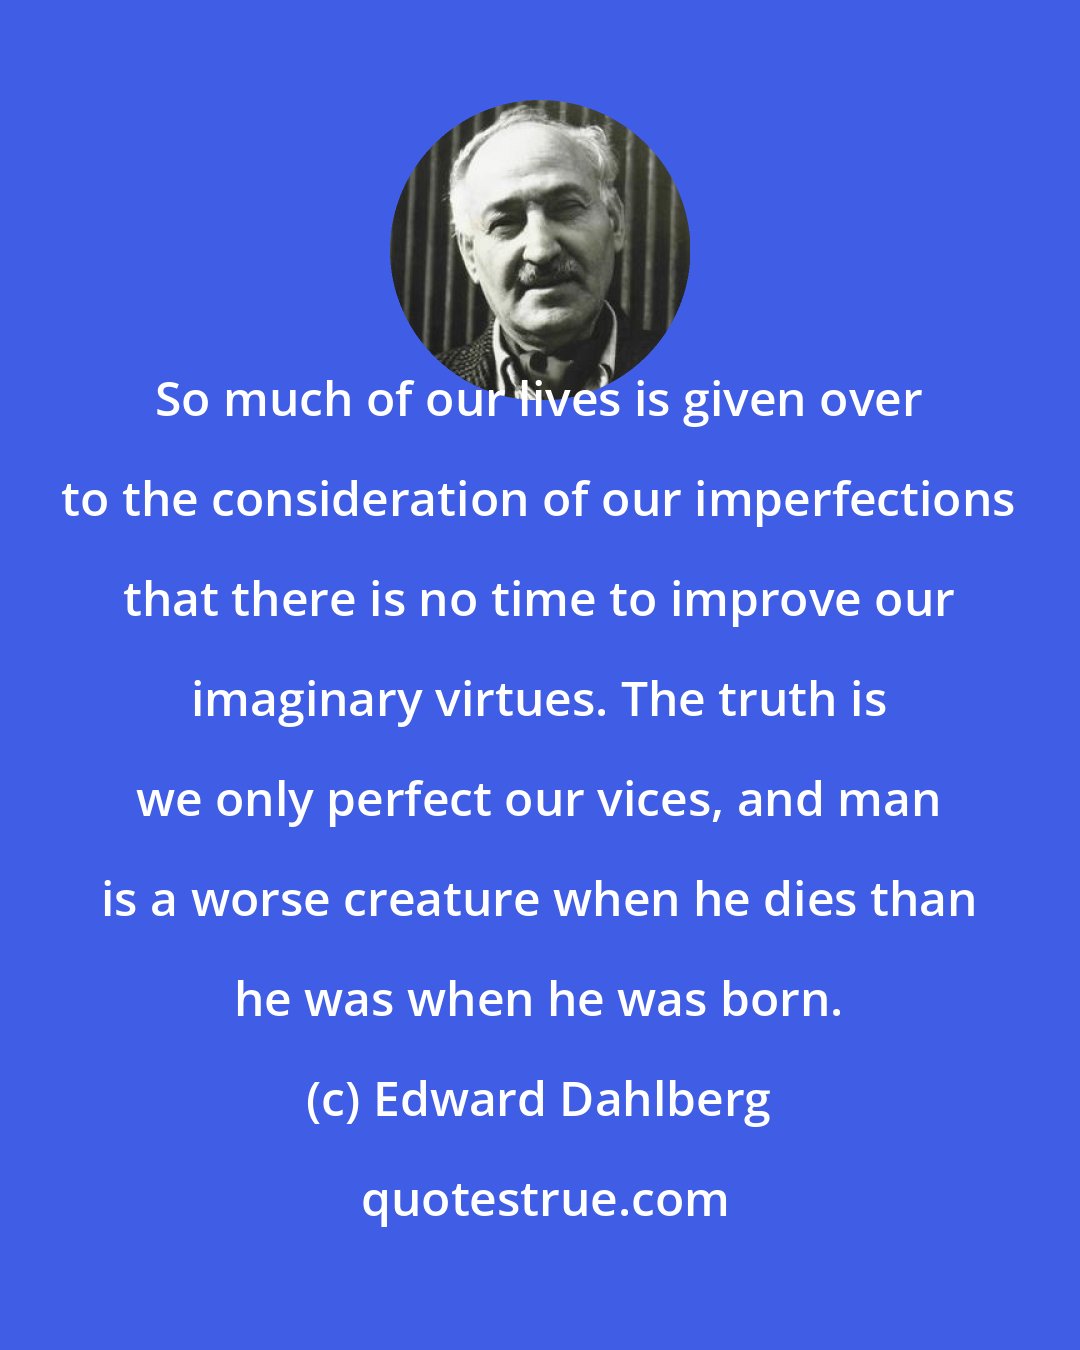 Edward Dahlberg: So much of our lives is given over to the consideration of our imperfections that there is no time to improve our imaginary virtues. The truth is we only perfect our vices, and man is a worse creature when he dies than he was when he was born.